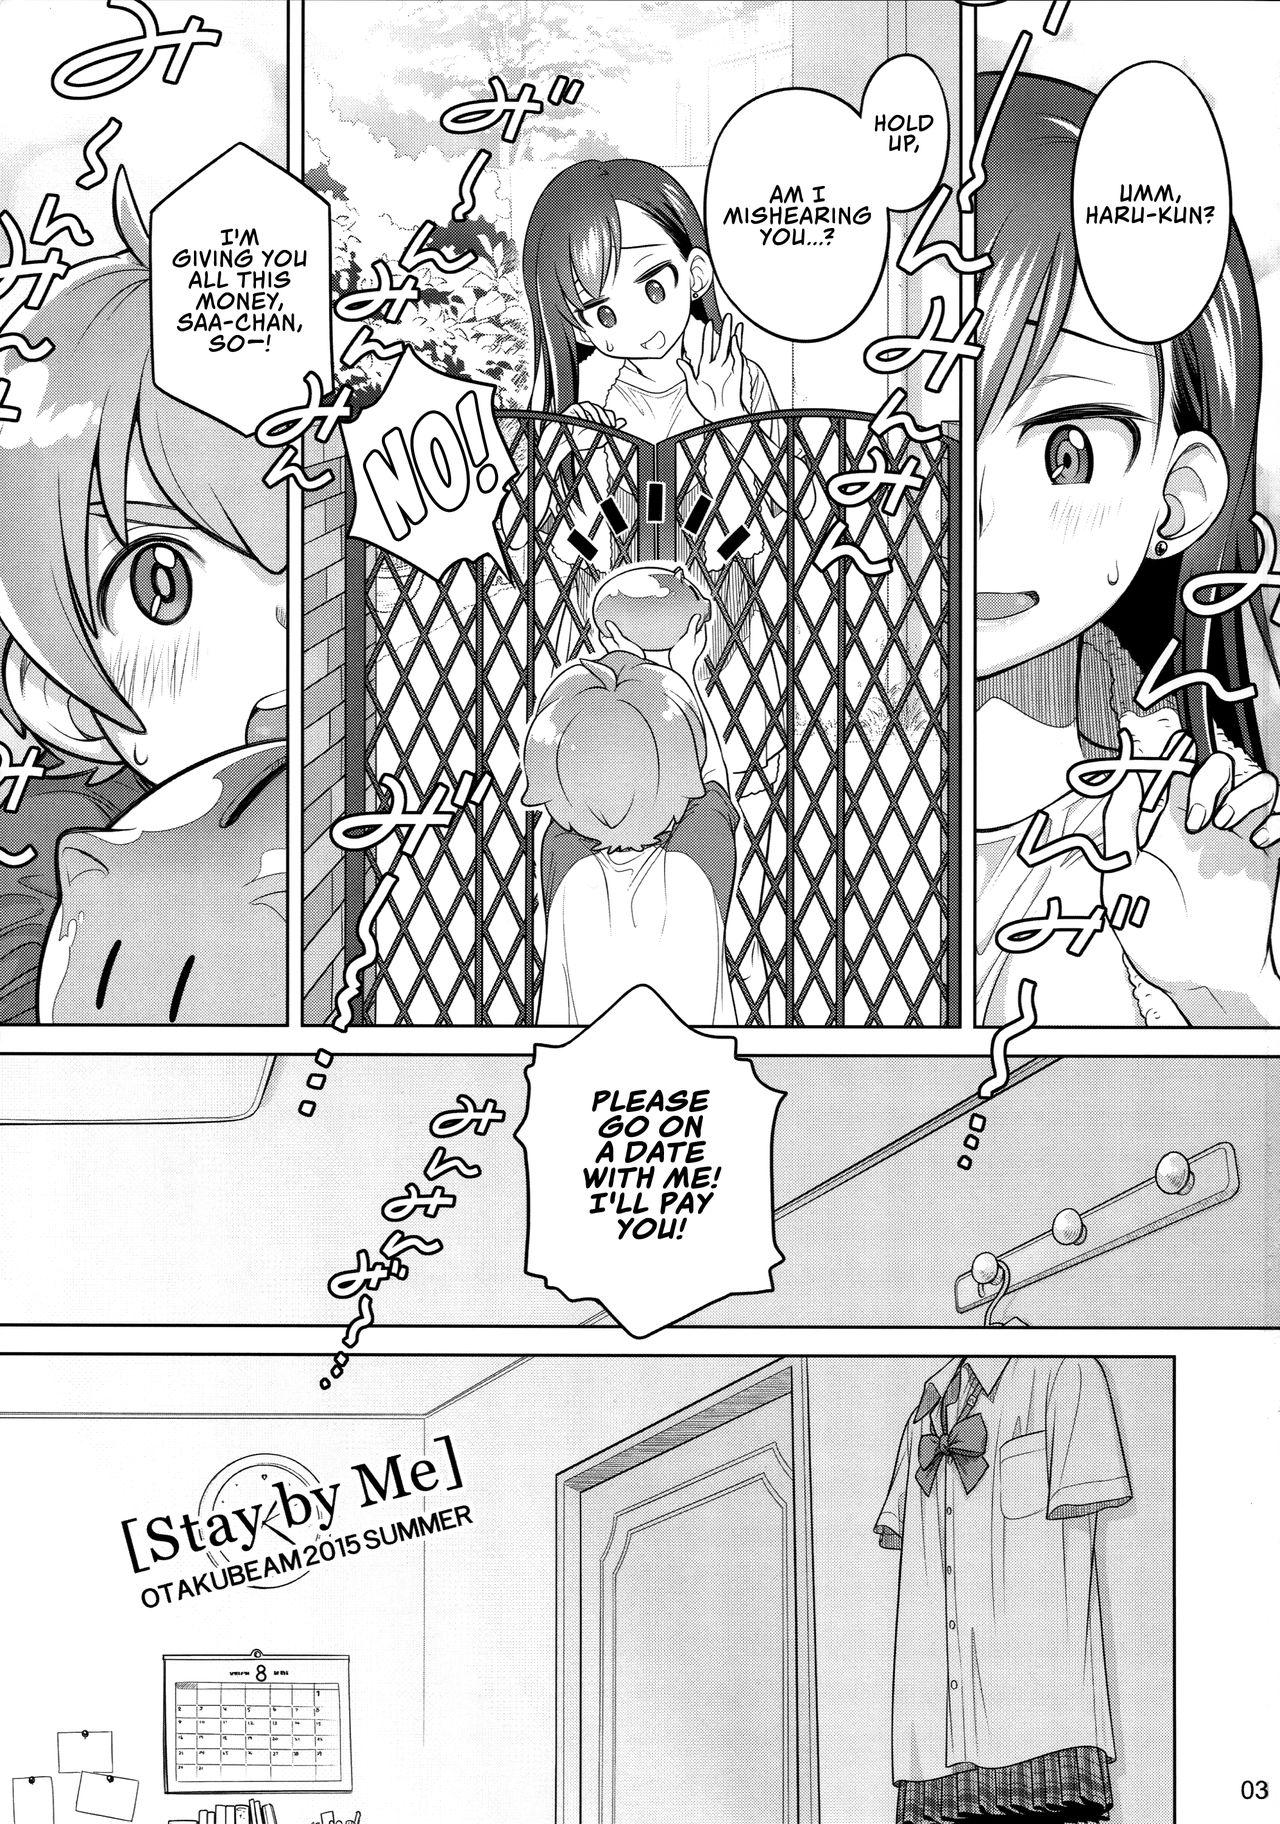 Strap On Stay by me - Original Rimming - Page 3